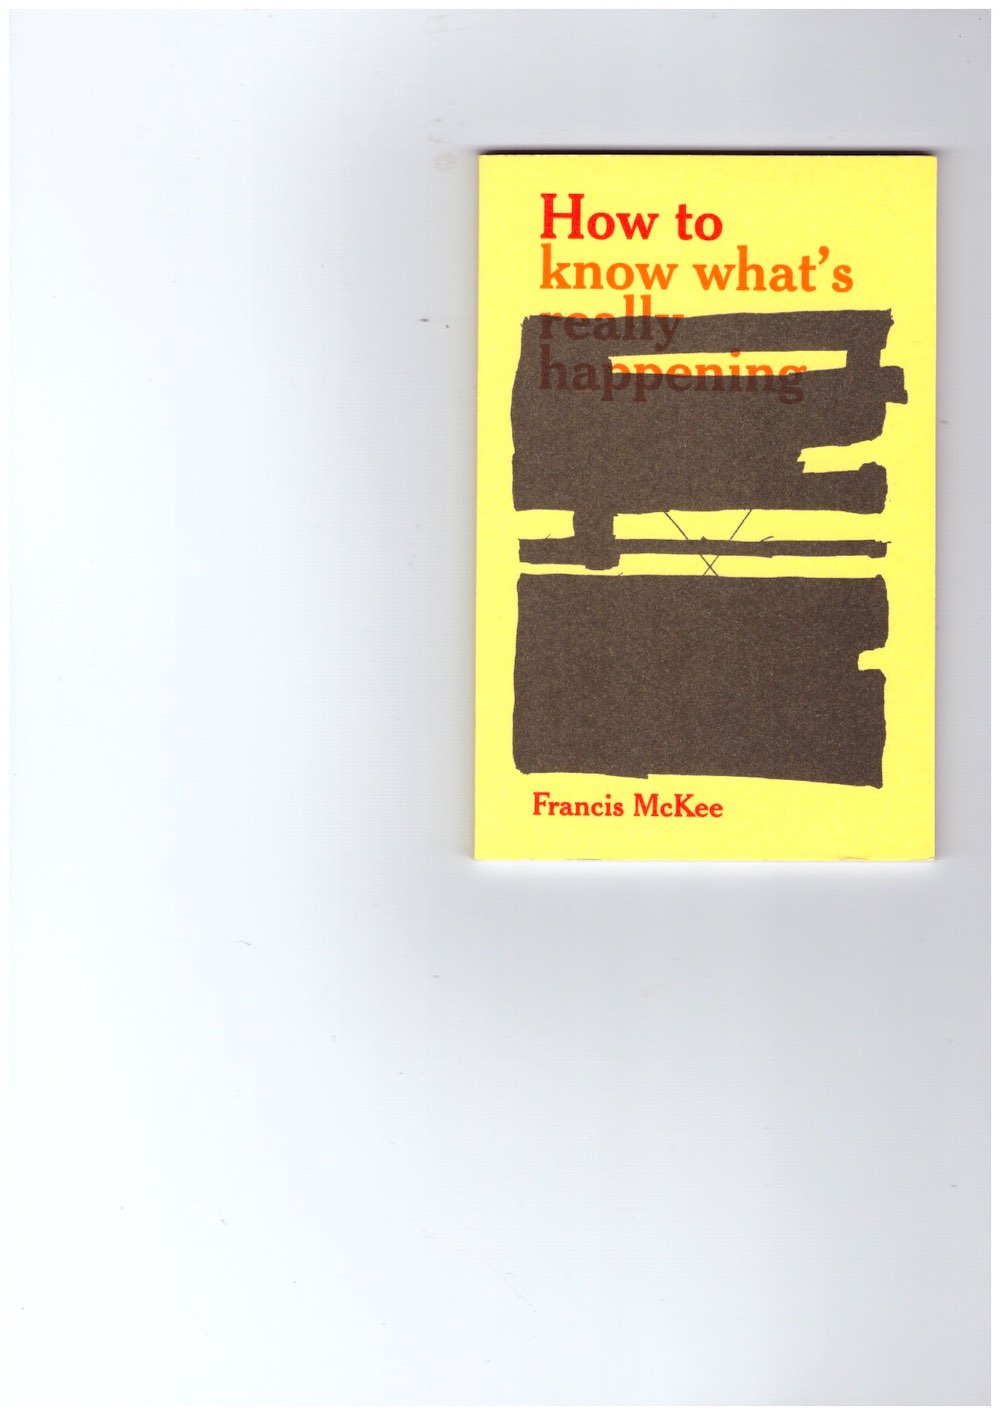 MCKEE, Francis - How to know what’s really happening